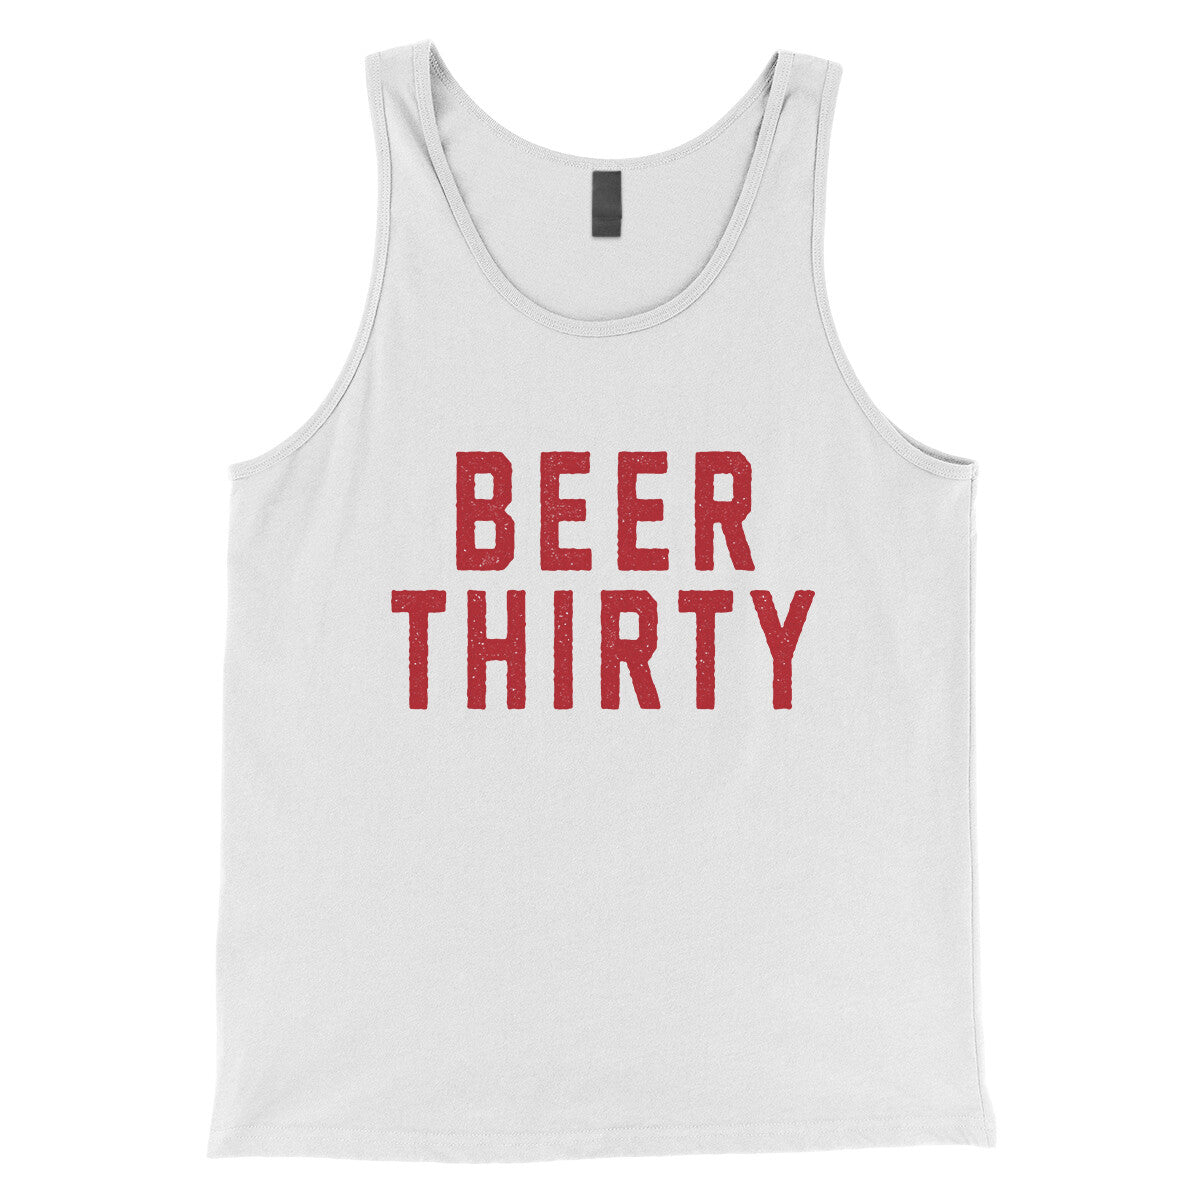 Beer Thirty in White Color